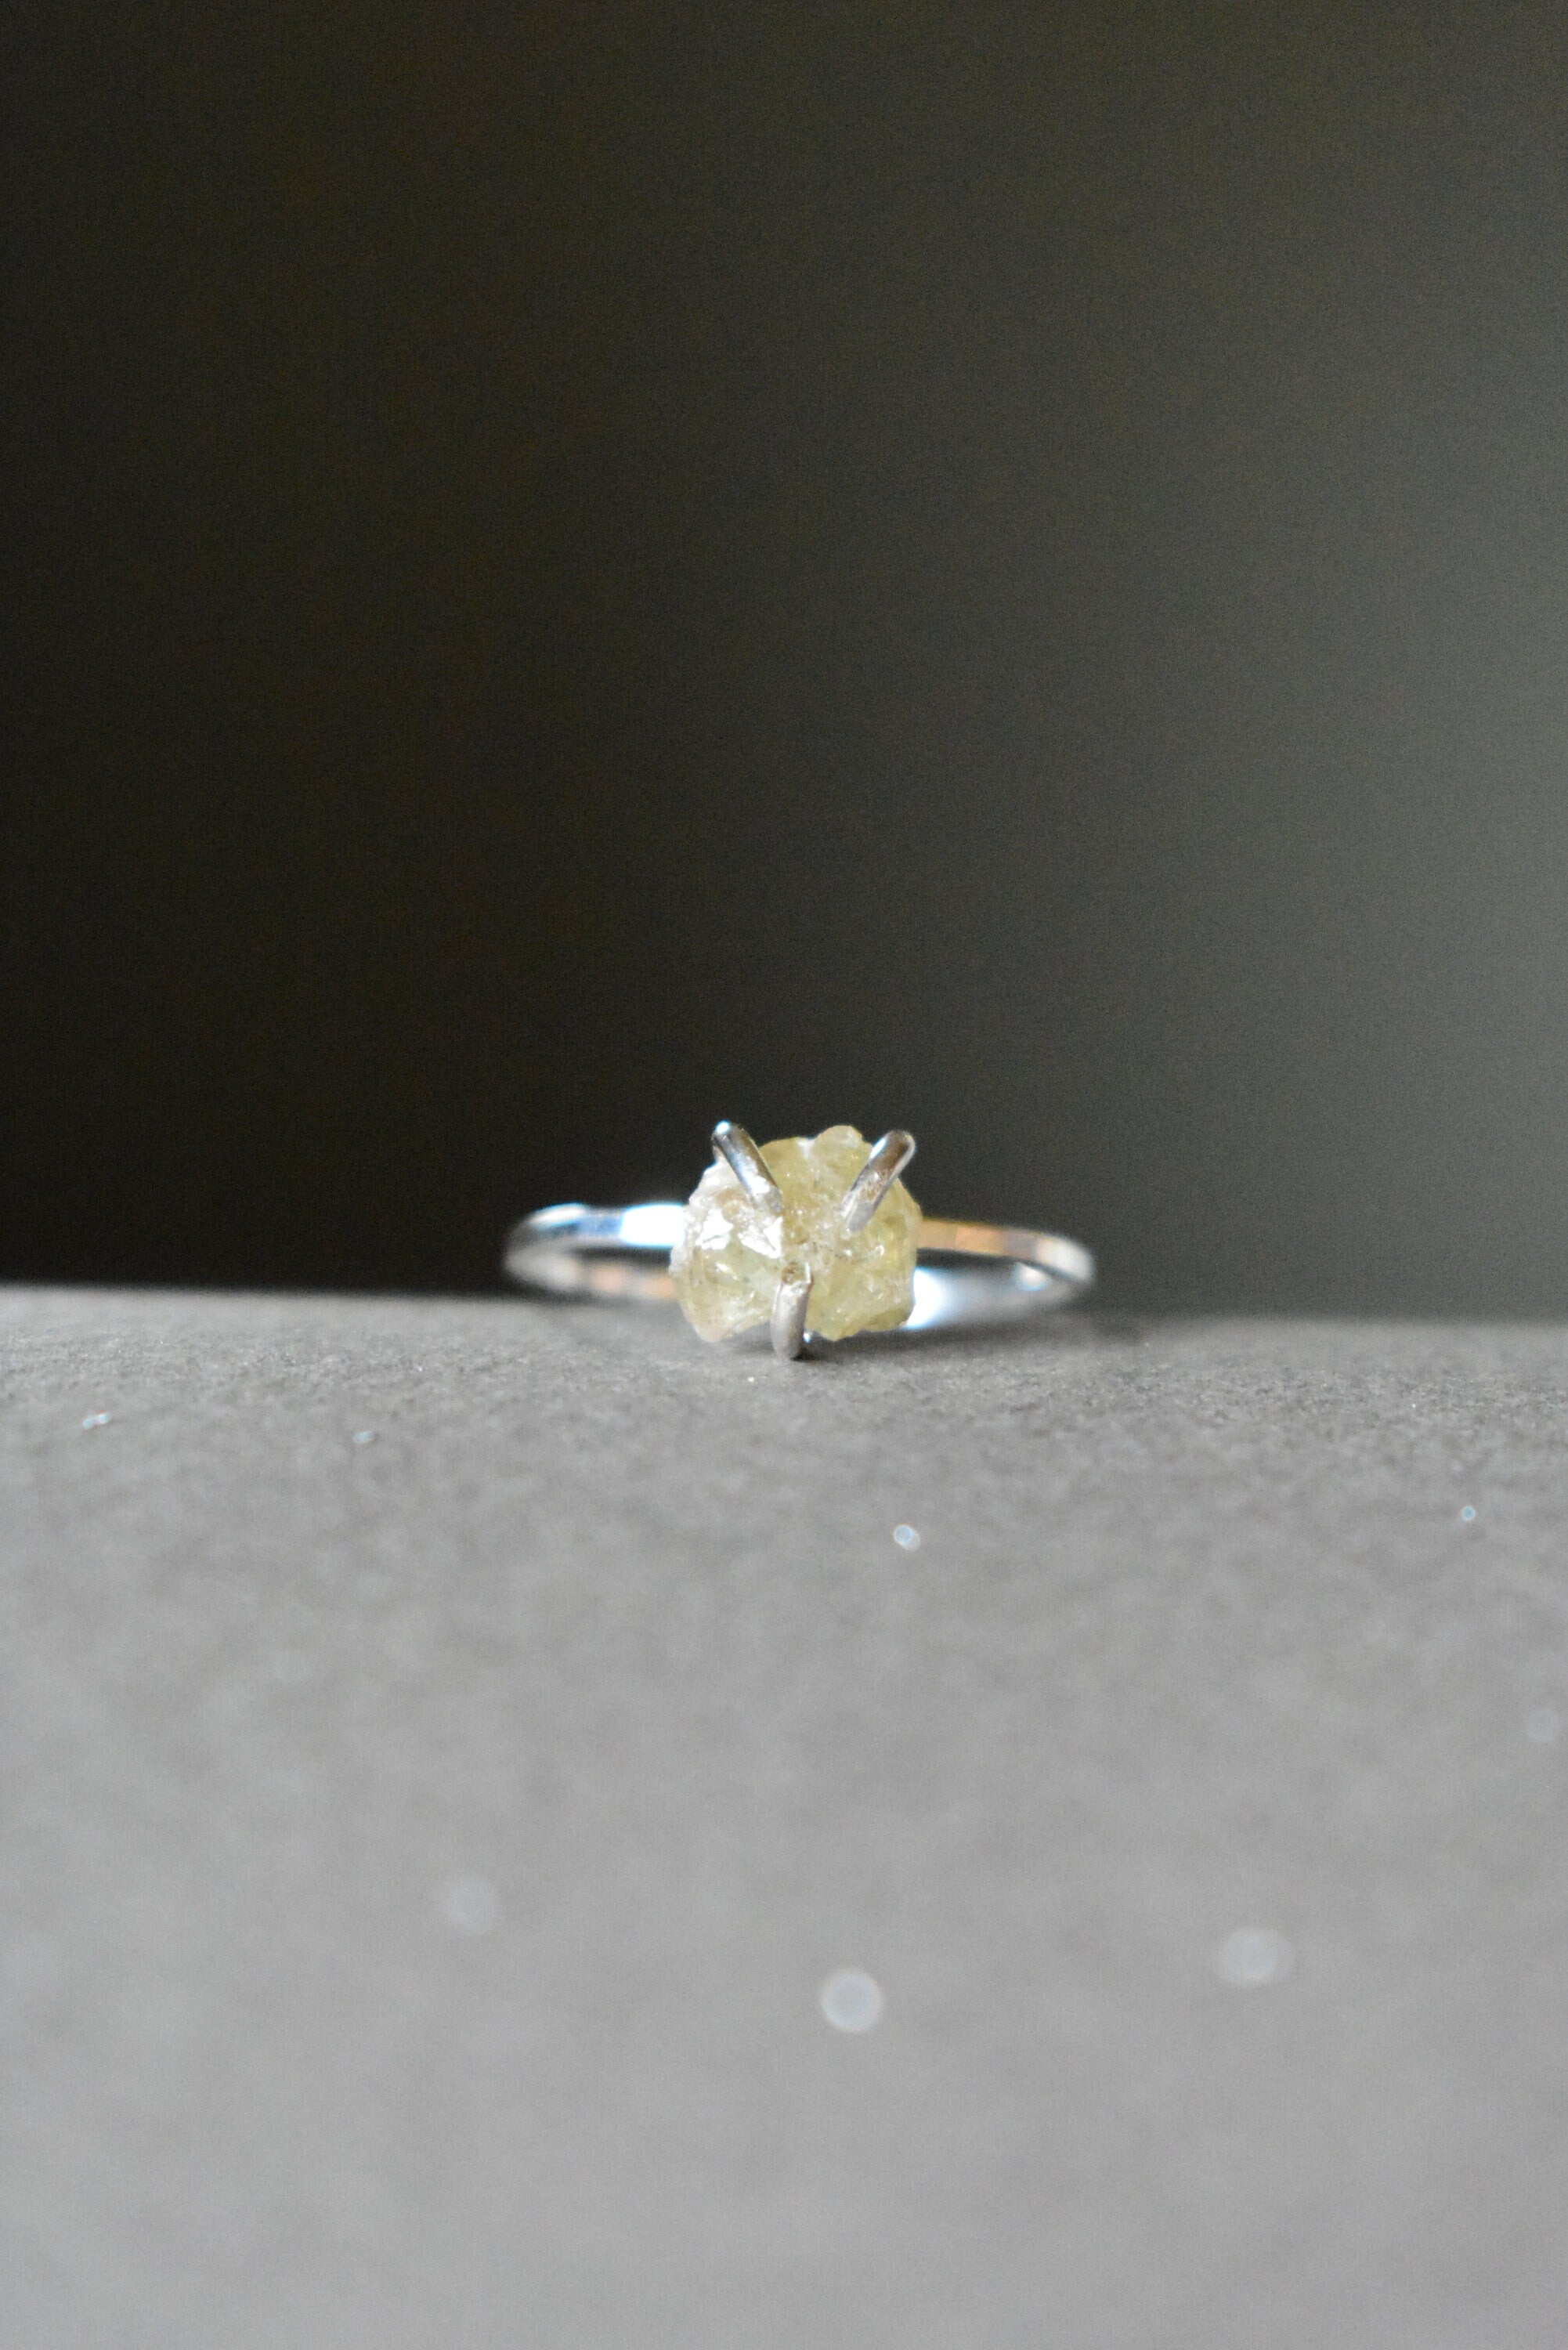 How Big is a 1 Carat Diamond Engagement Ring? - DR Blog